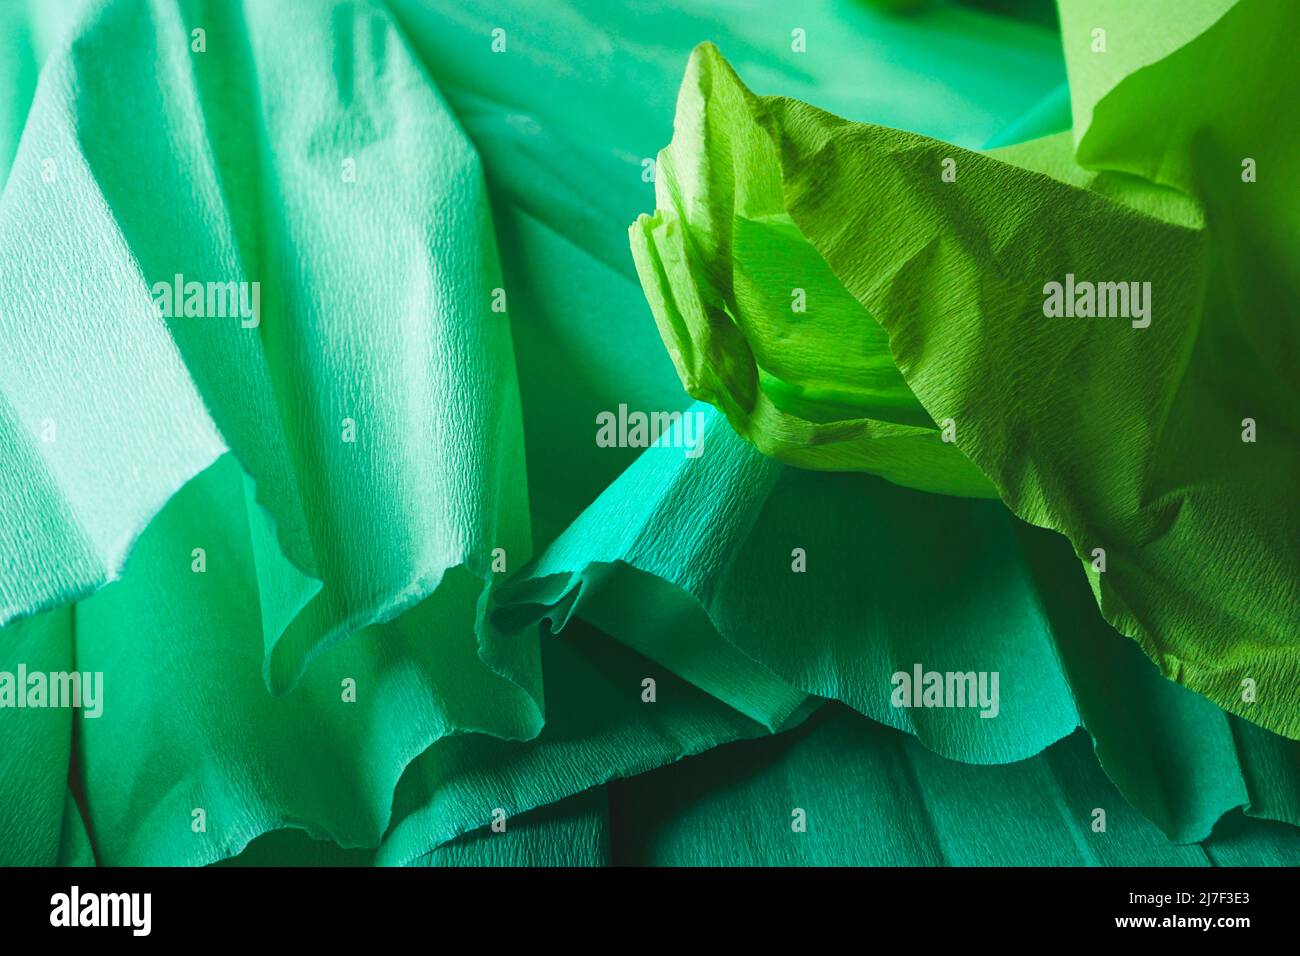 Green textured image of crepe paper in green tones Stock Photo